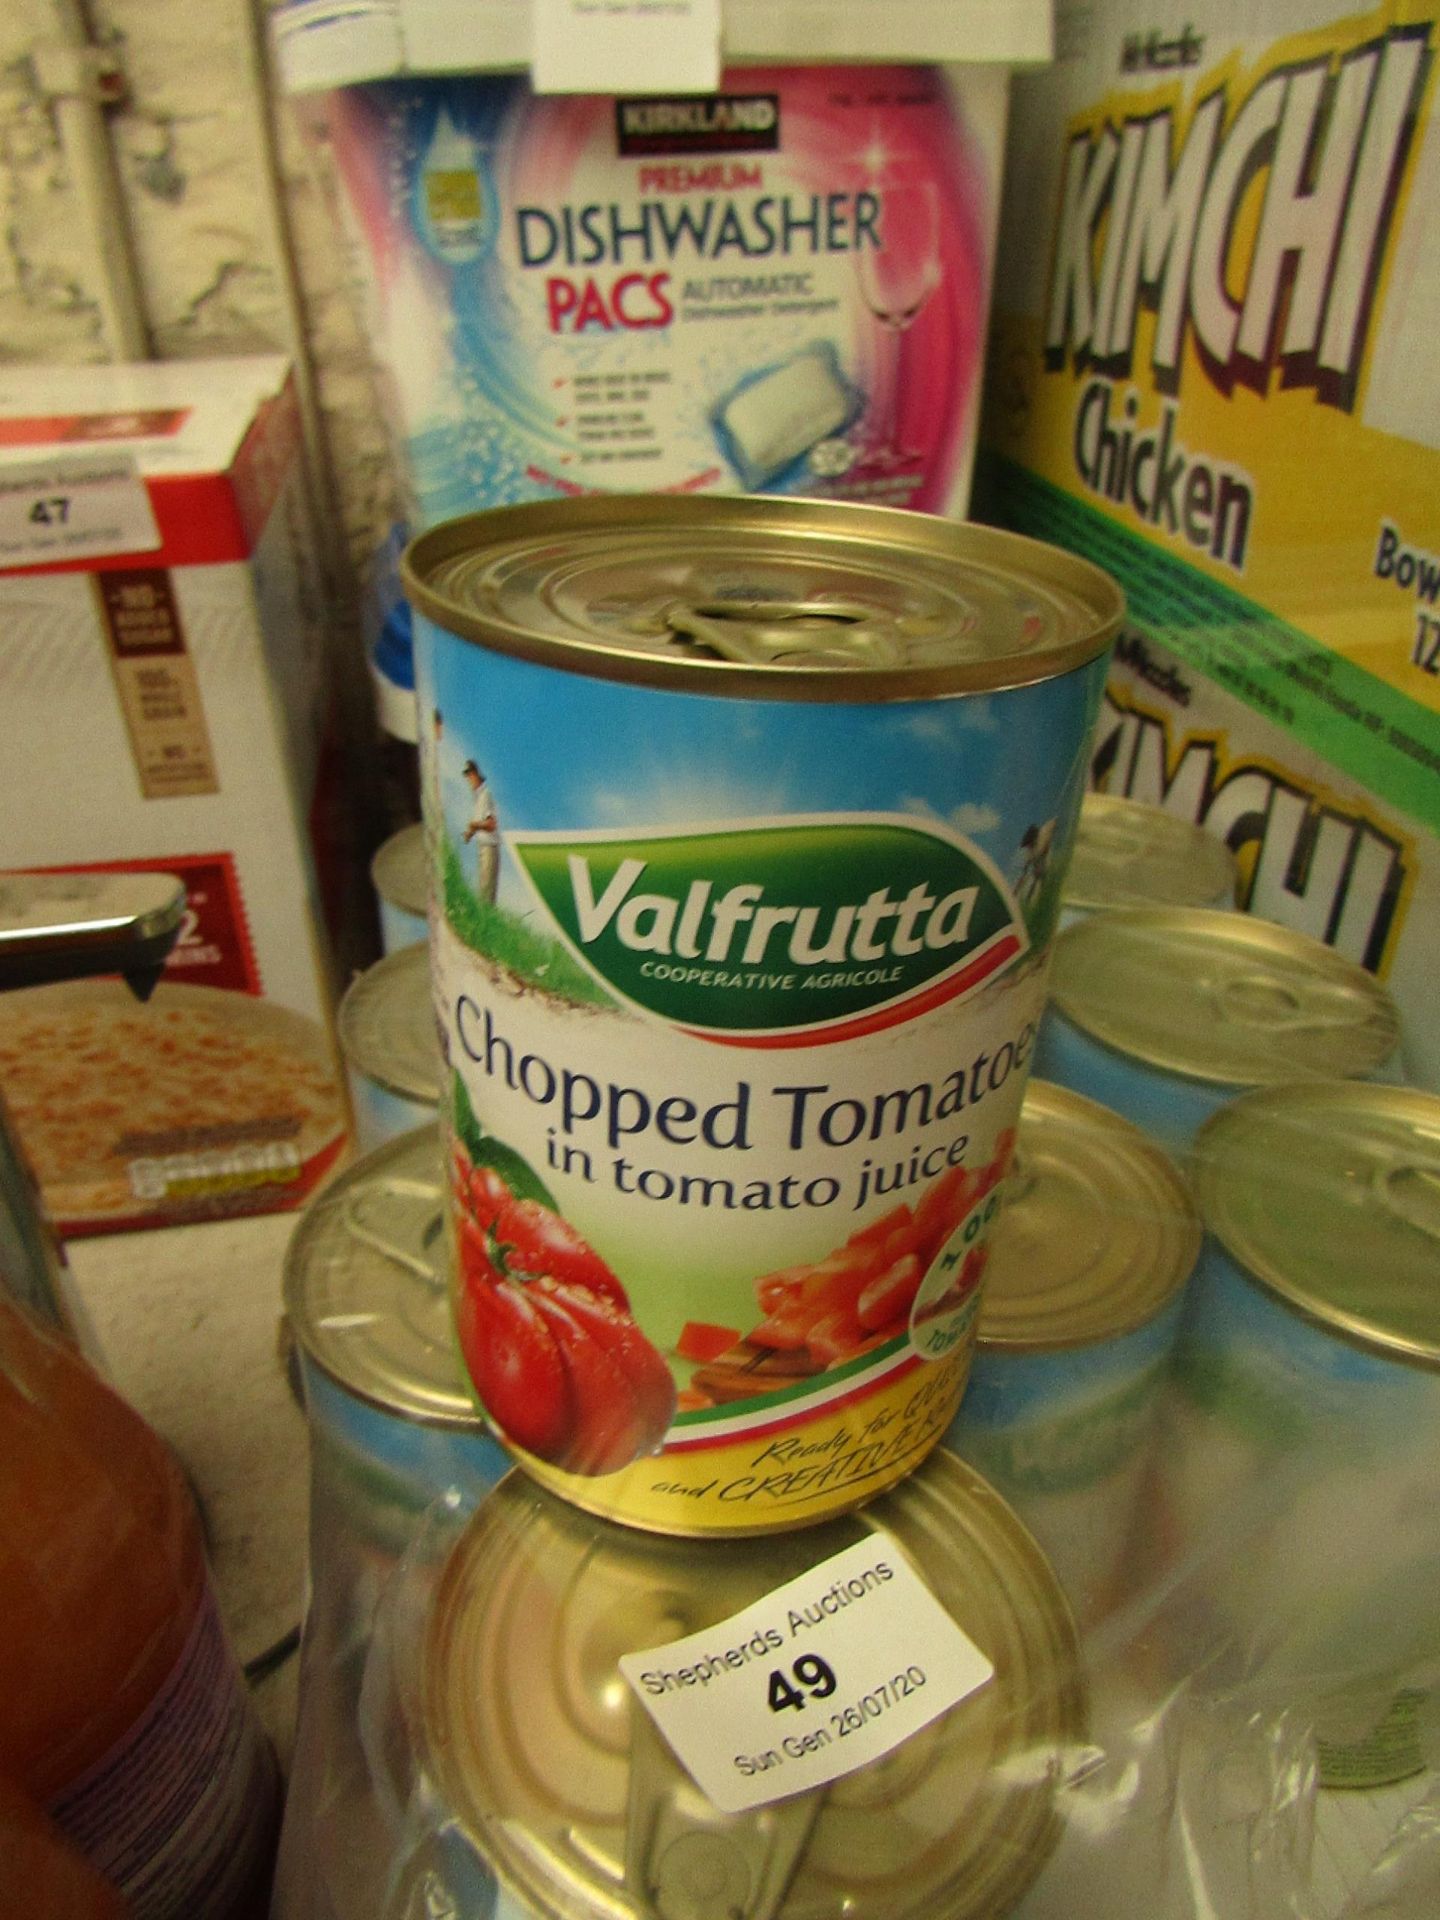 11 X Cans of Valfrutta Chopped Tomatoes in tomatoe juice each can is 400G BBE 12/2022